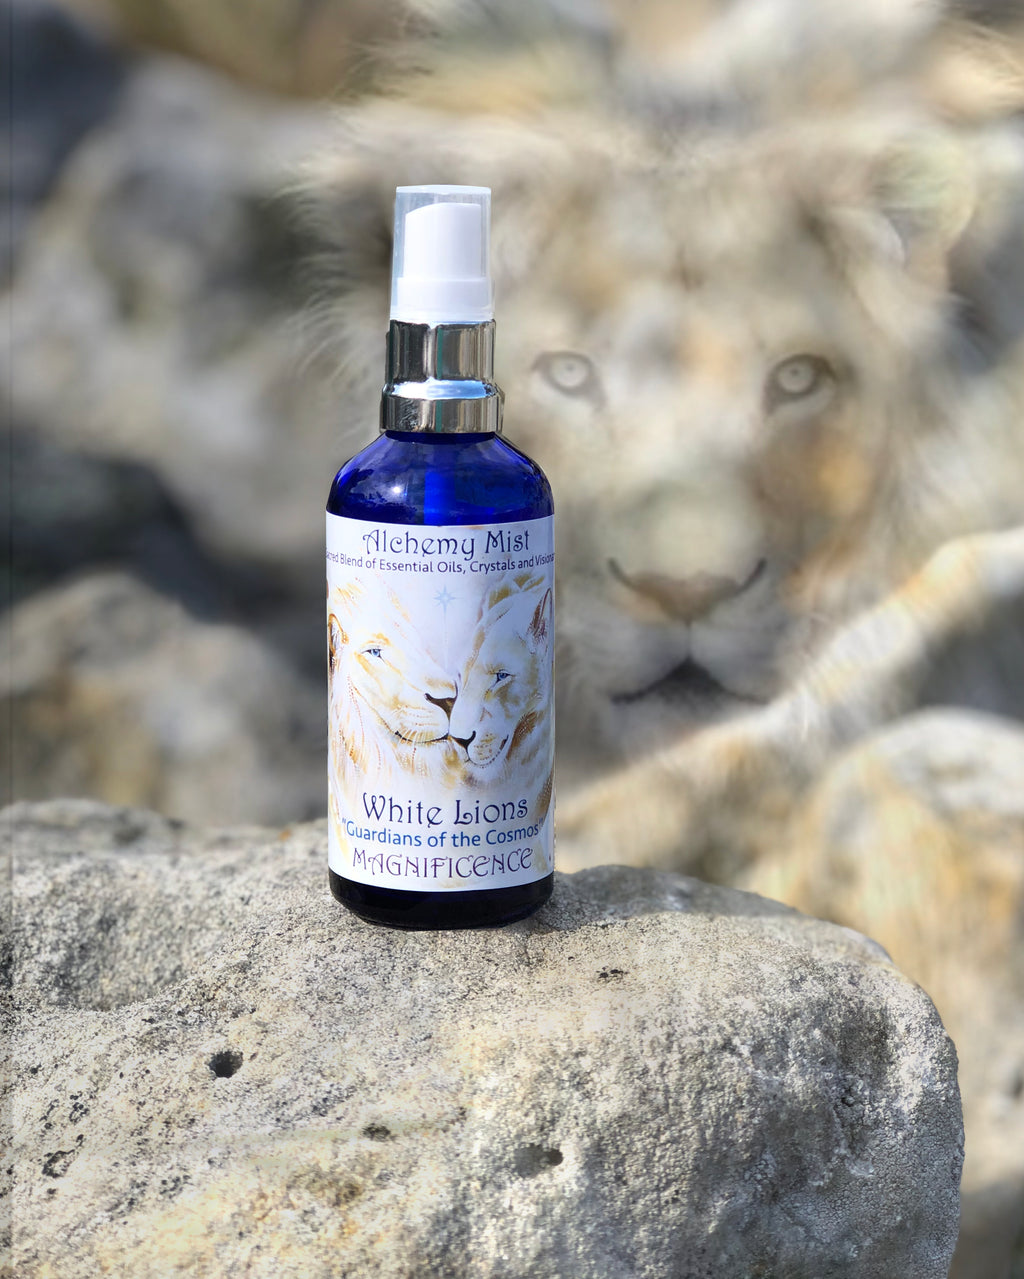 Alchemy mist used for cleansing the Aura and personal spaces at home and at work. Contains essential oils and crystal essences. Artisan crafted in Byron Bay.
